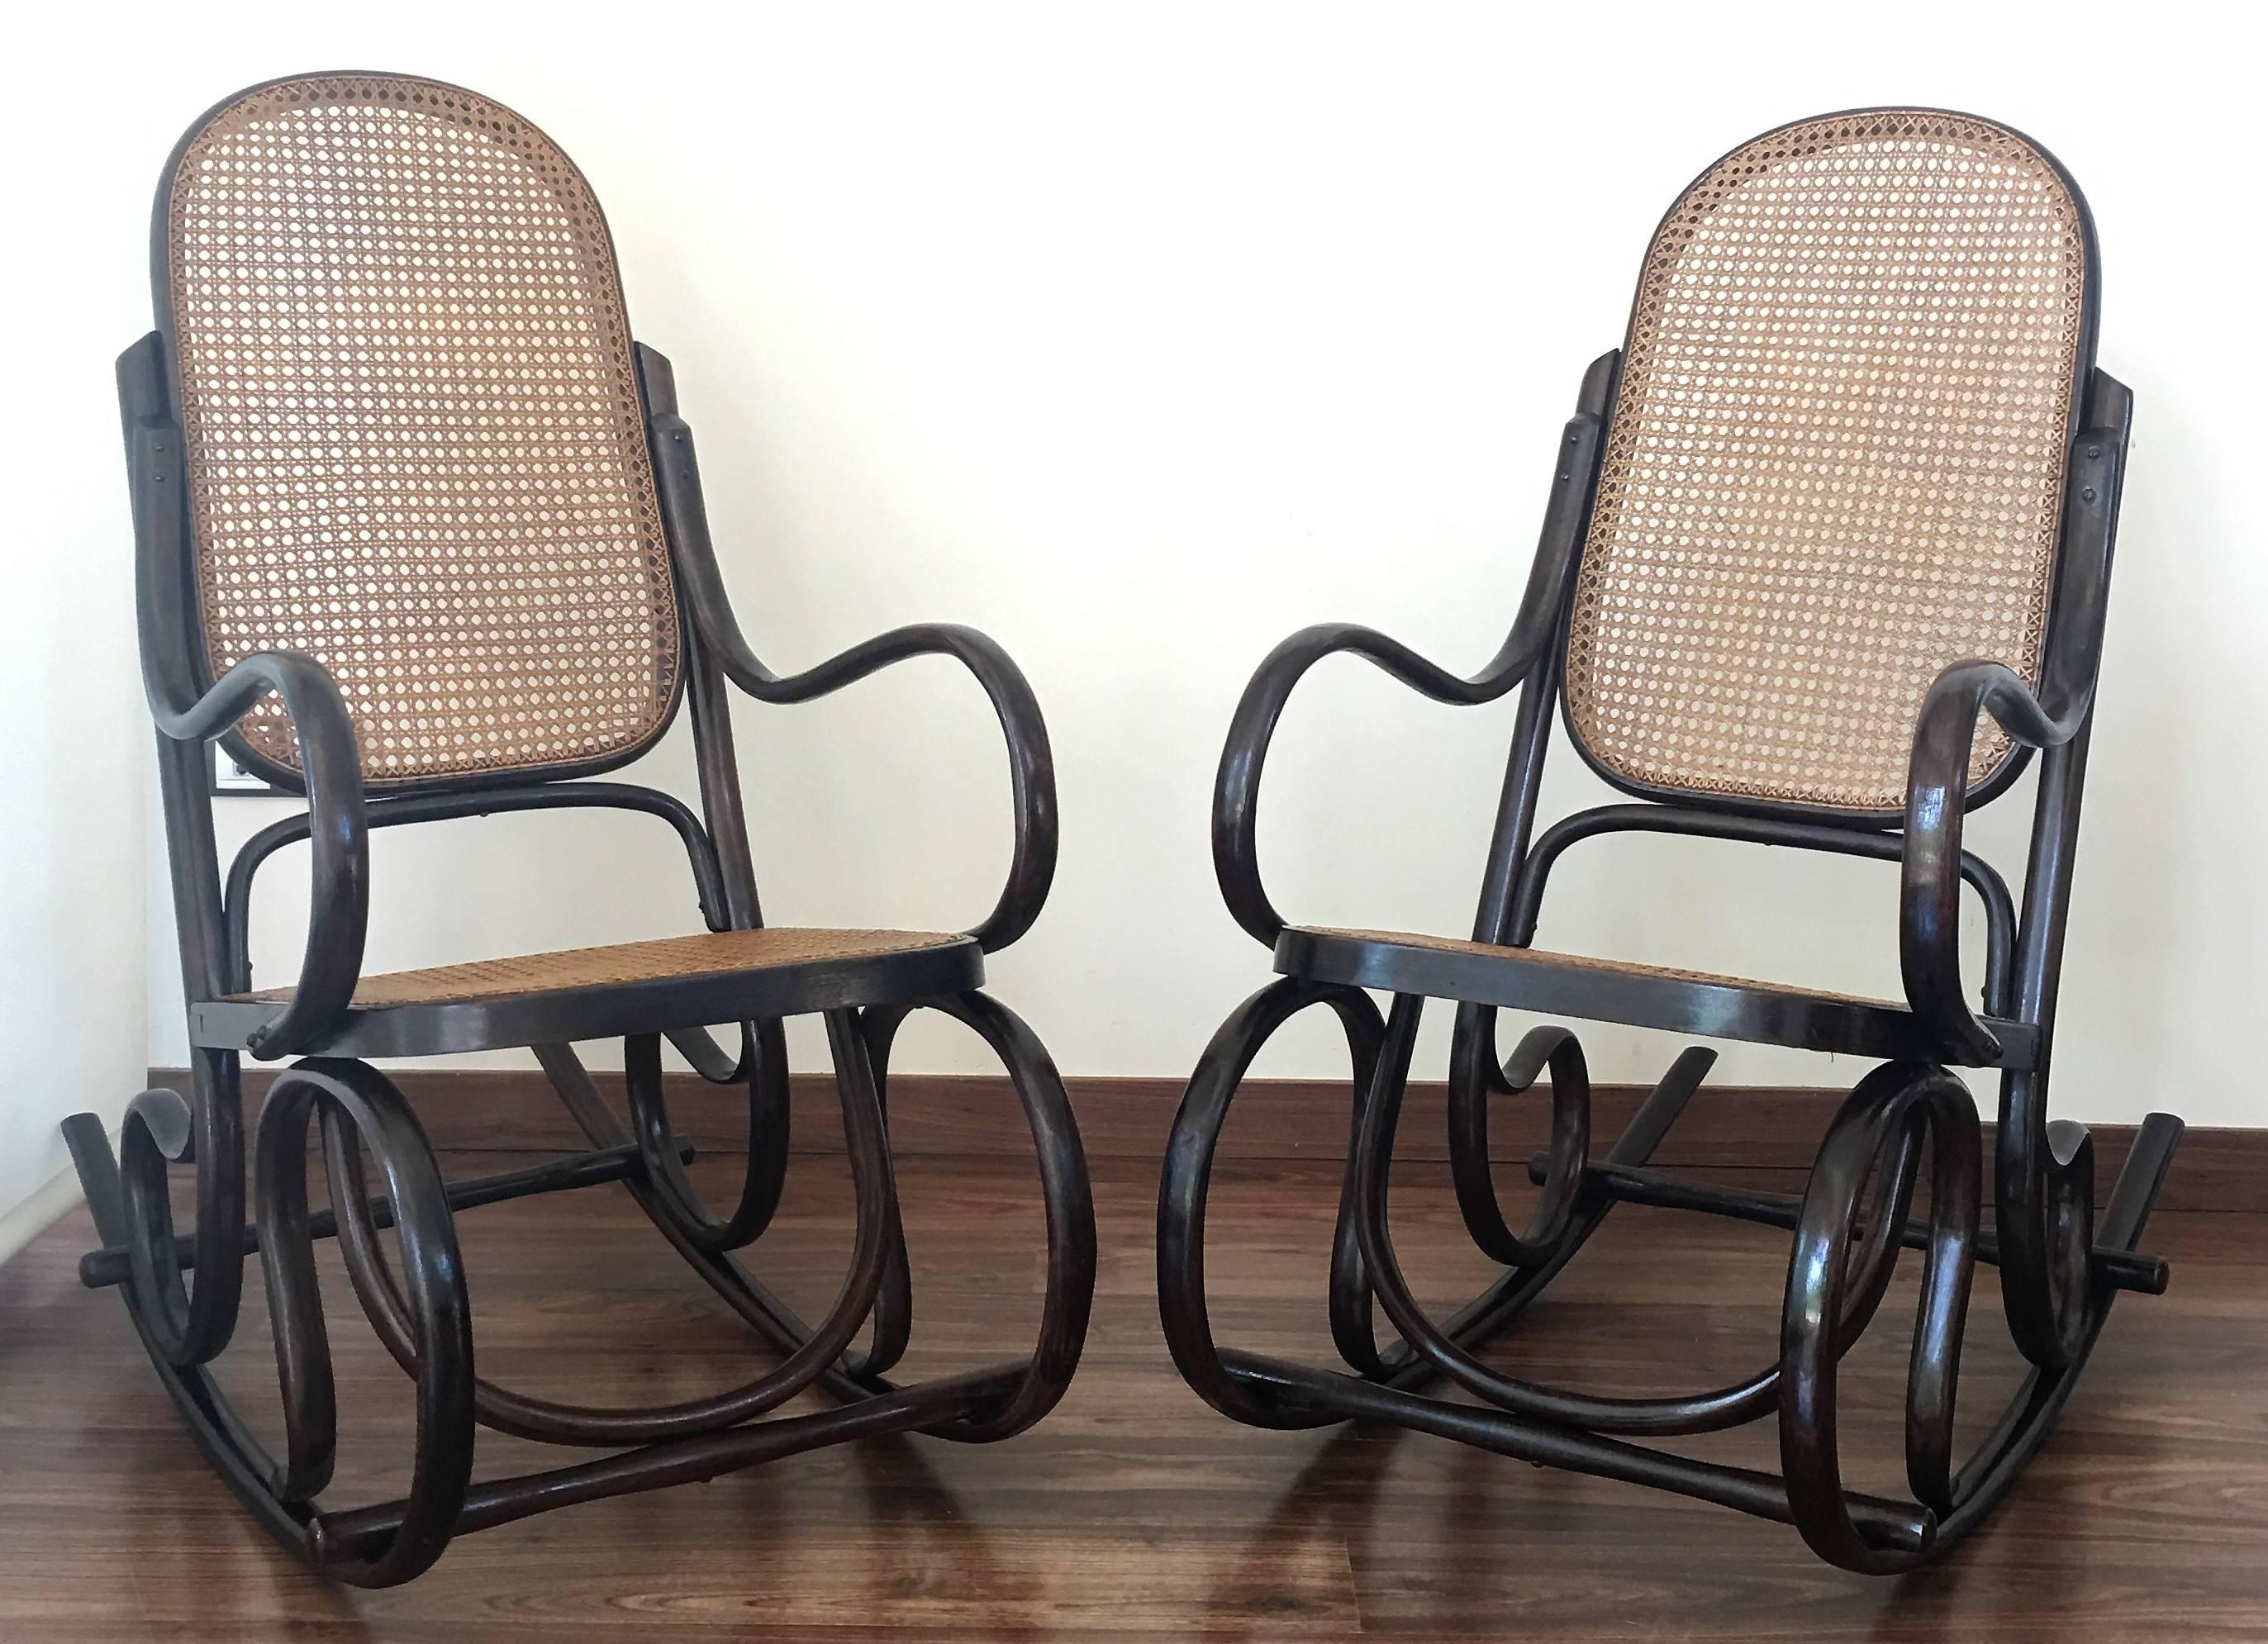 20th Century Pair of Bentwood Rocking Chairs with Cane Seat and Back